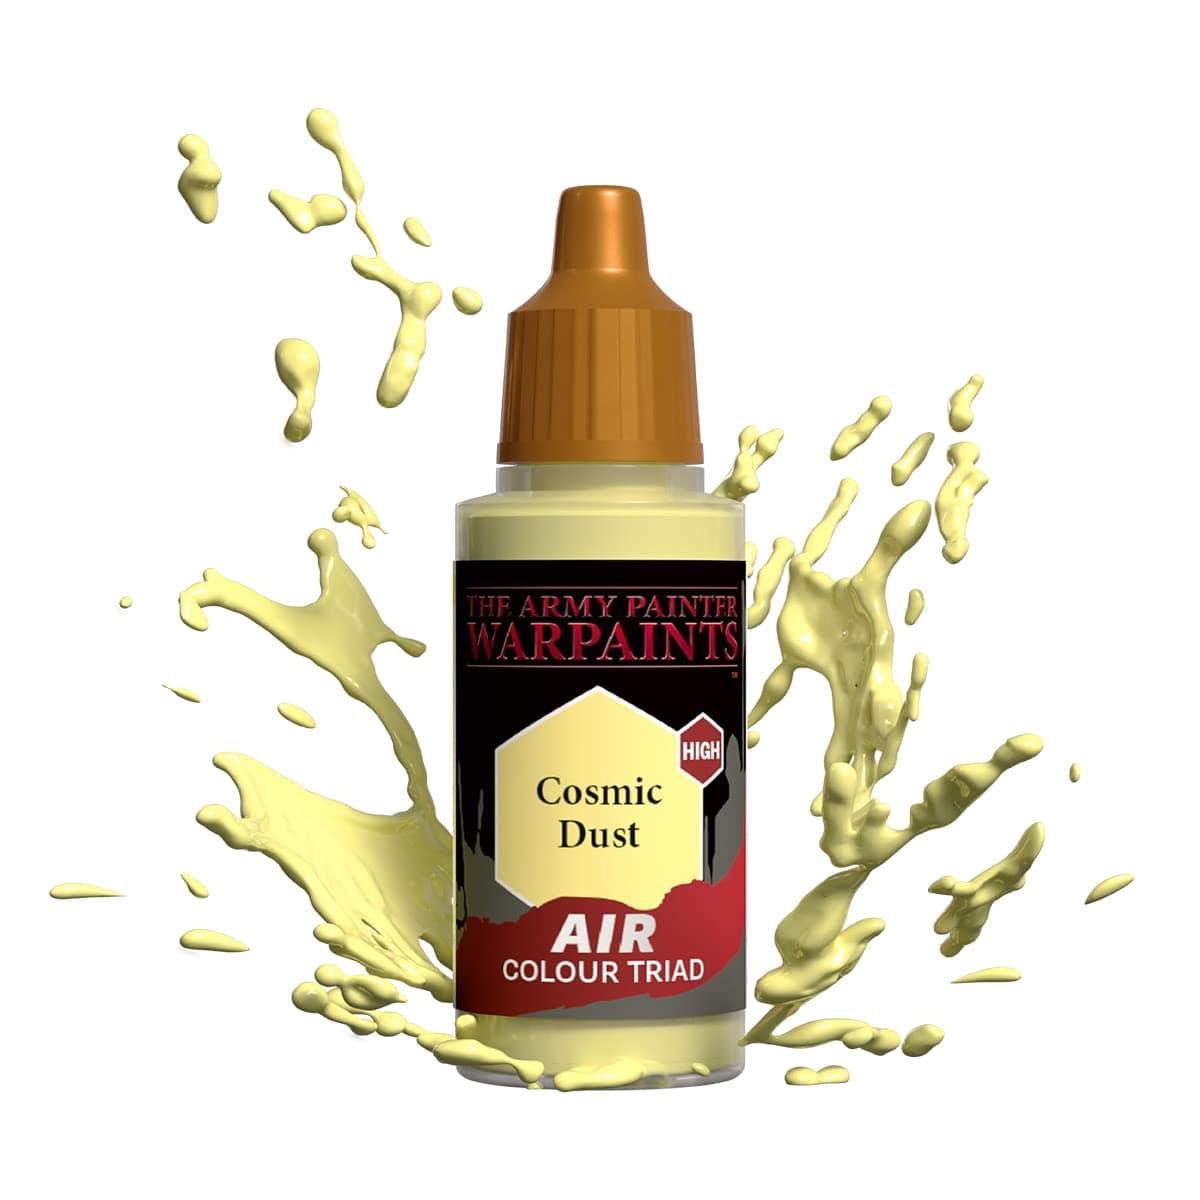 The Army Painter Accessories The Army Painter Warpaints Air: Cosmic Dust 18ml